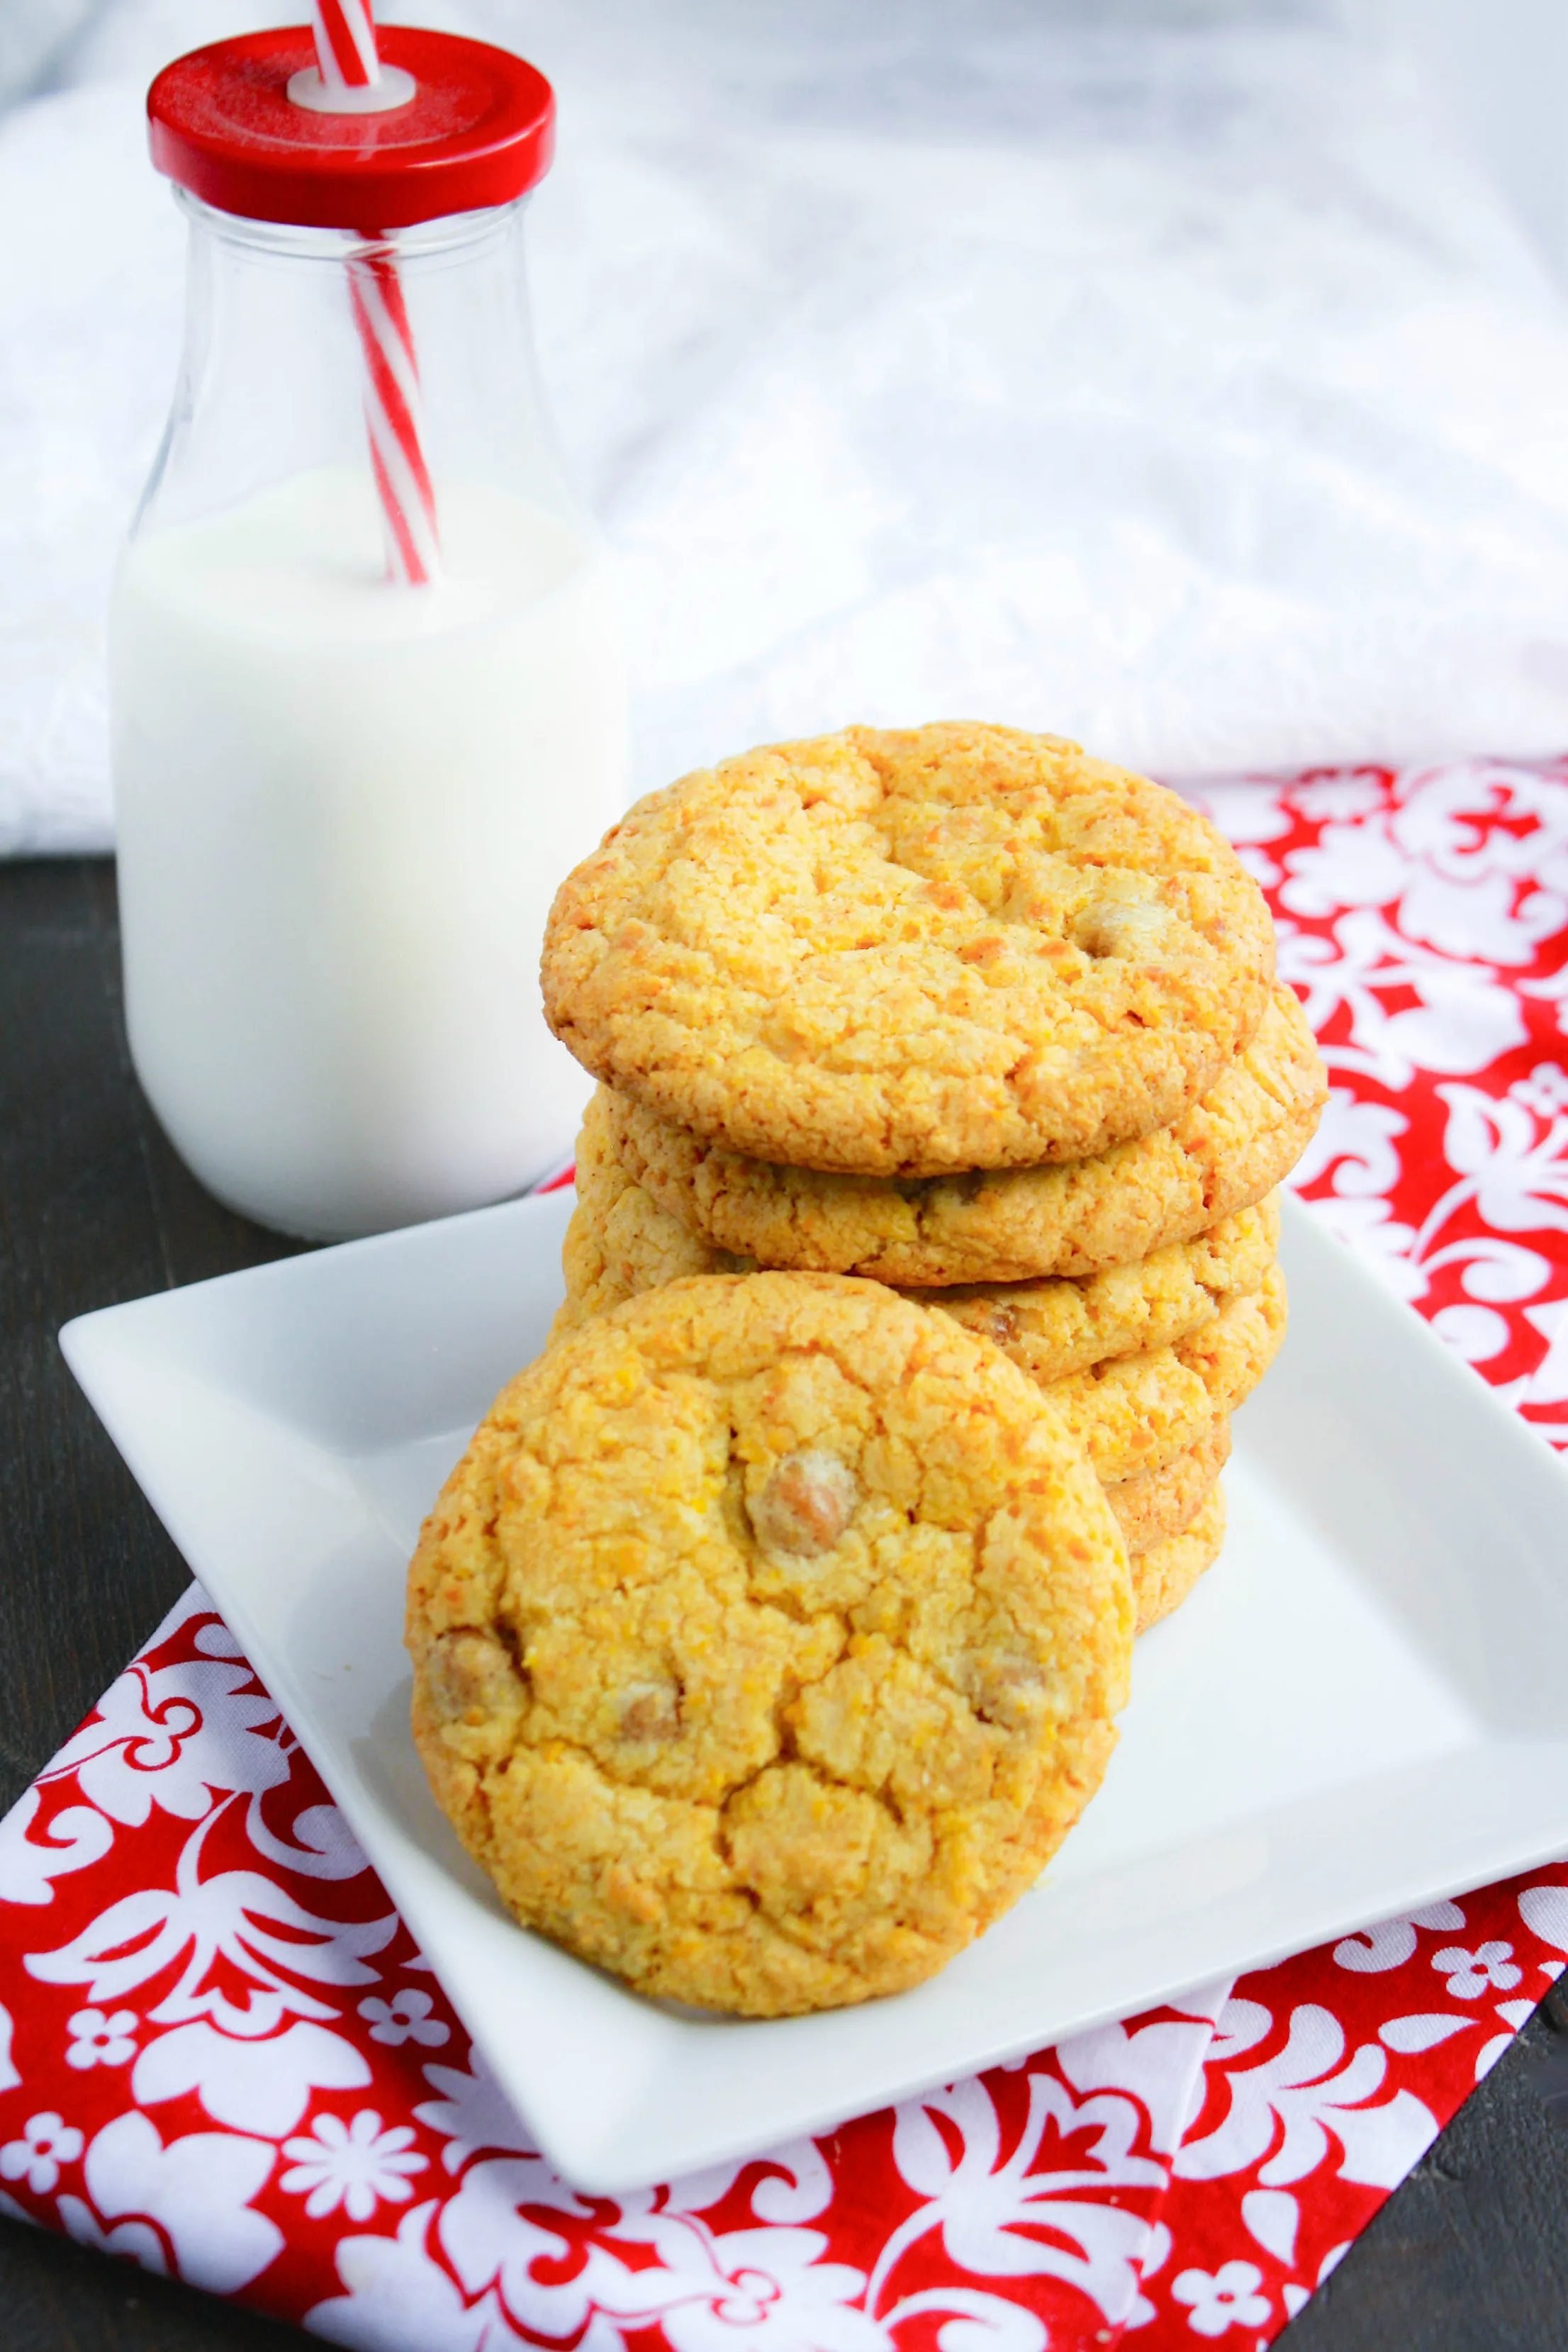 These Spicy Caramel & Corn Cookies are different and definitely delicious. A must try!